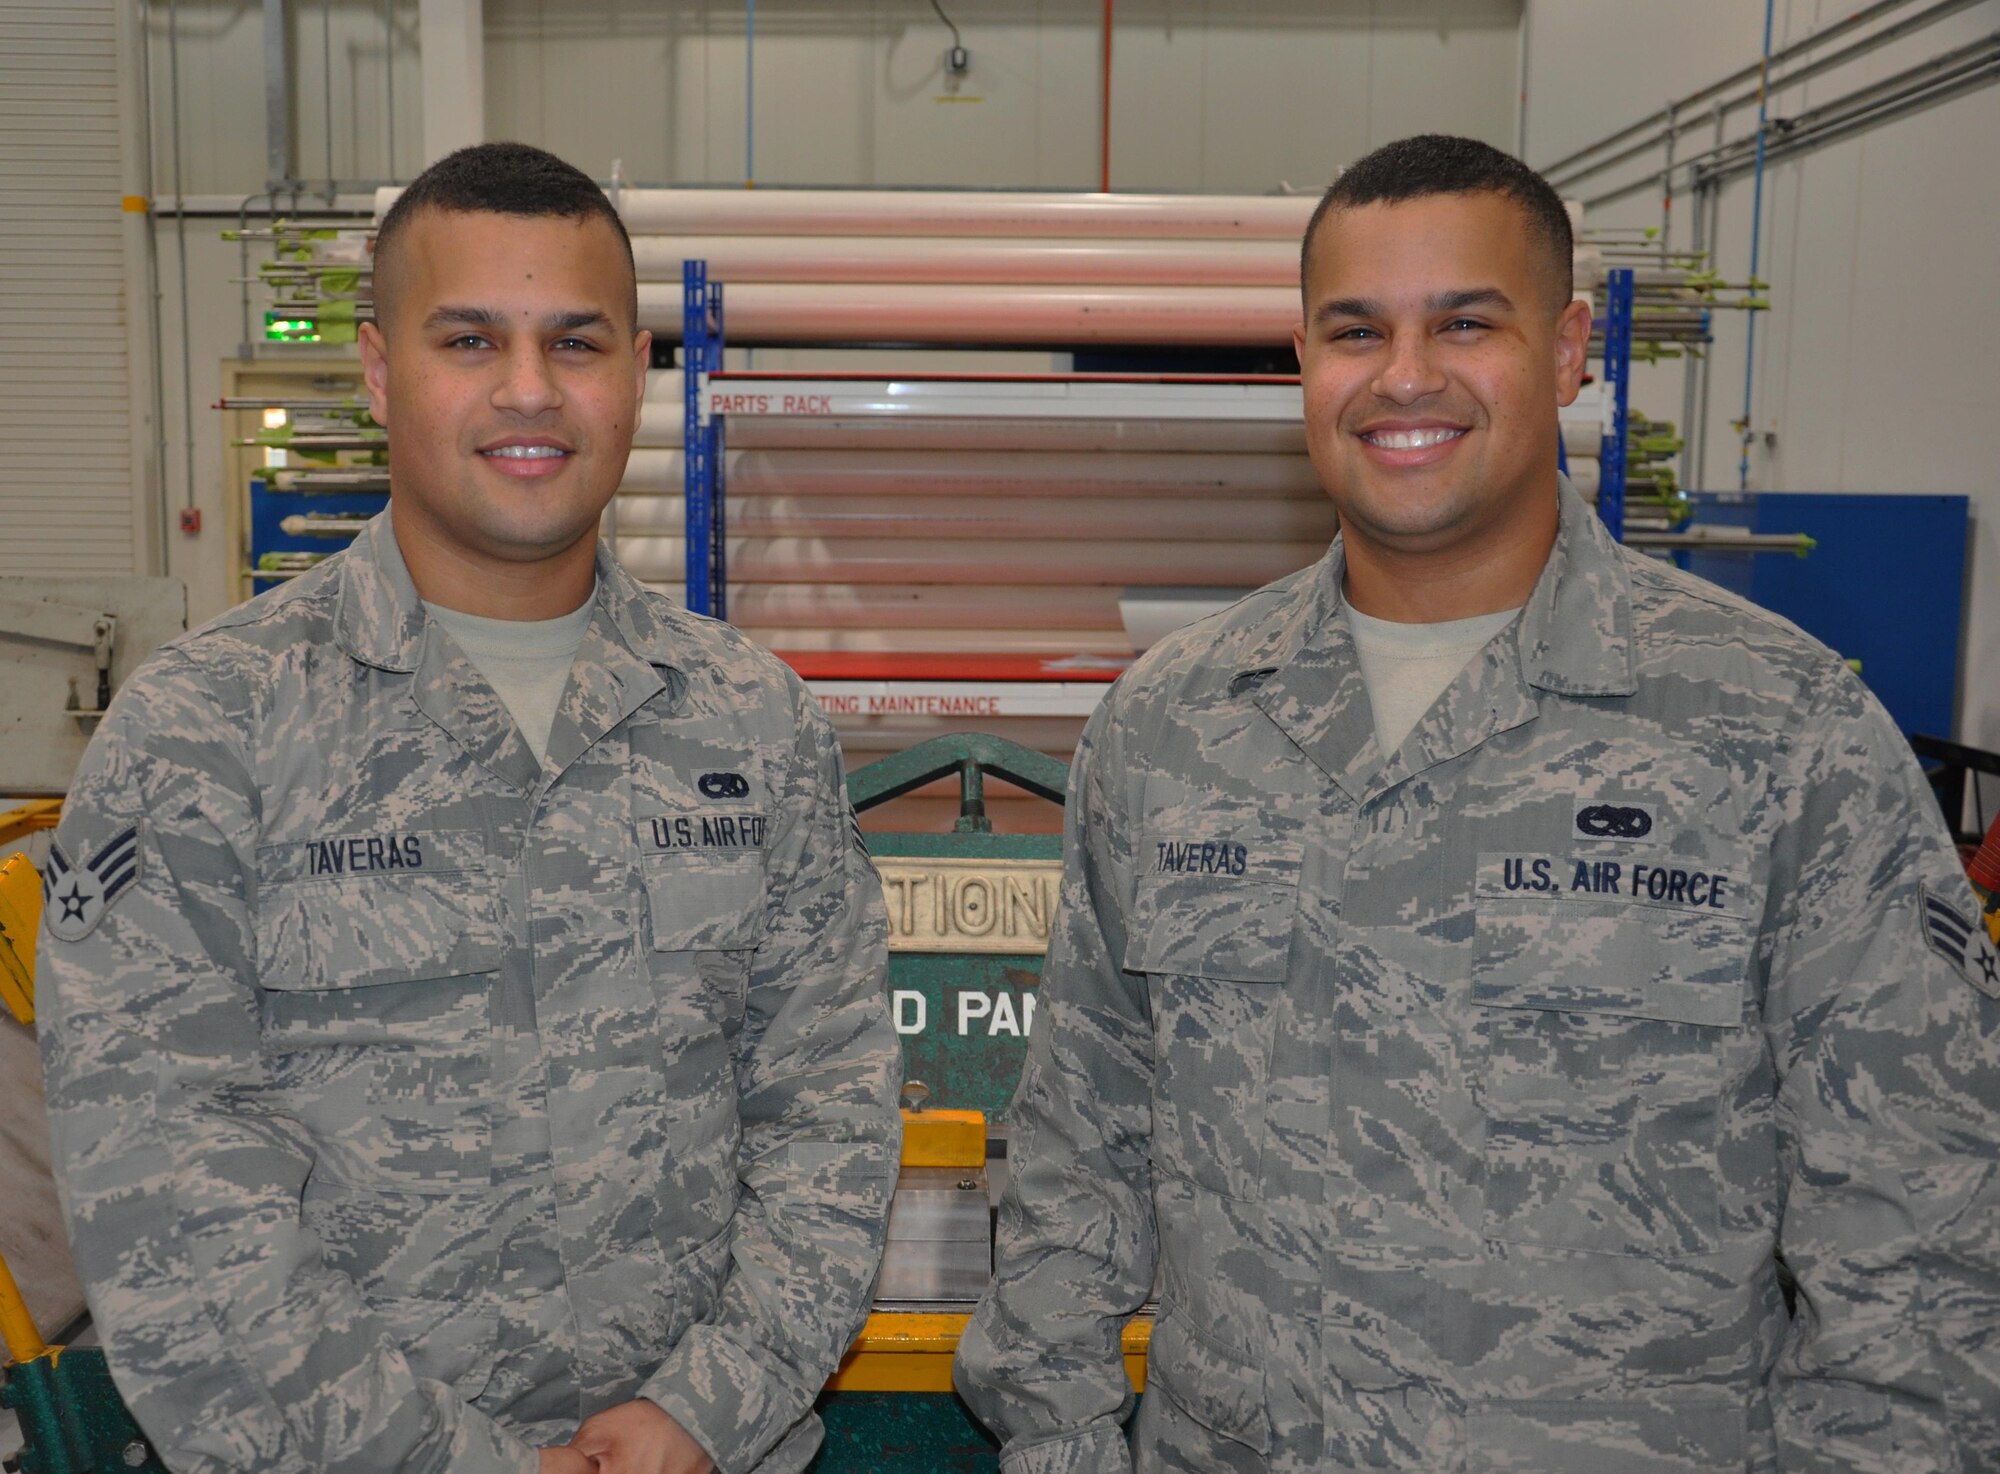 Senior Airman Carlos Taveras (Left), 379th Expeditionary Maintenance Squadron aircraft structural maintenance apprentice, and Senior Airman Emmanuel Taveras (Right), 379 EMXS electrical and environmental journeyman, both twin brothers from Bronx, New York, pose for a photo March 16. The brothers deployed to the same unit at Al Udeid Air Base, Qatar in January. (U.S. Air Force photo by Tech. Sgt. James Hodgman/Released) 